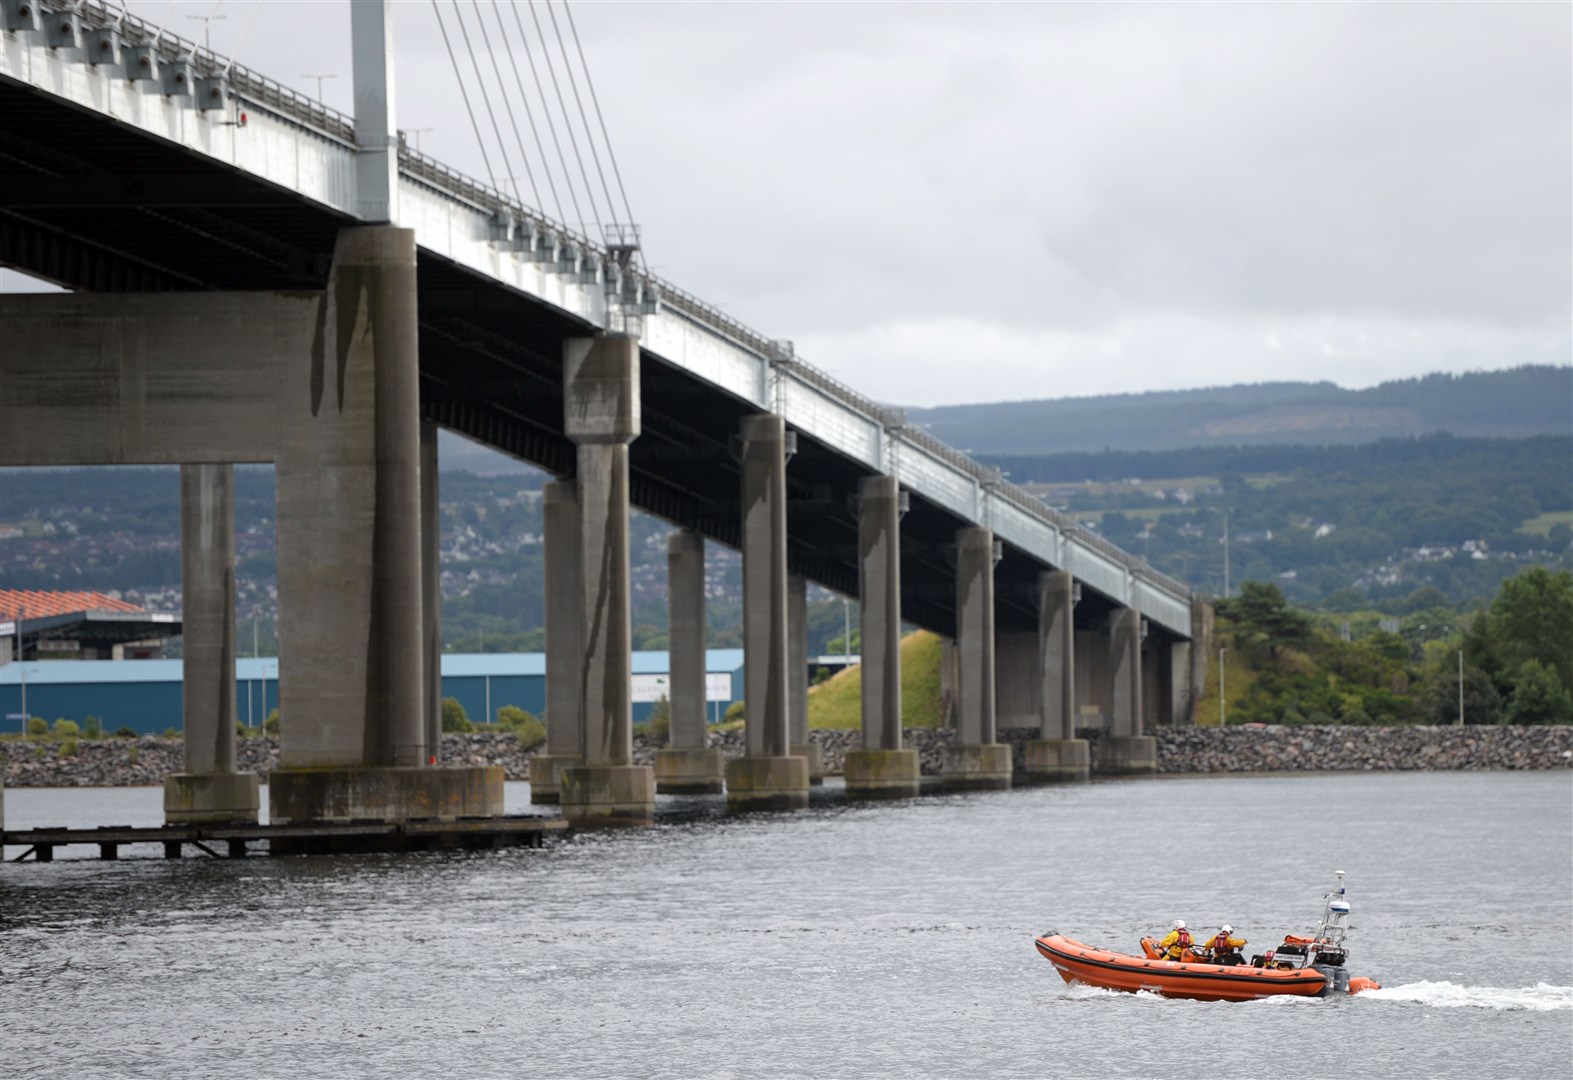 The Kessock lifeboat in action (file image).